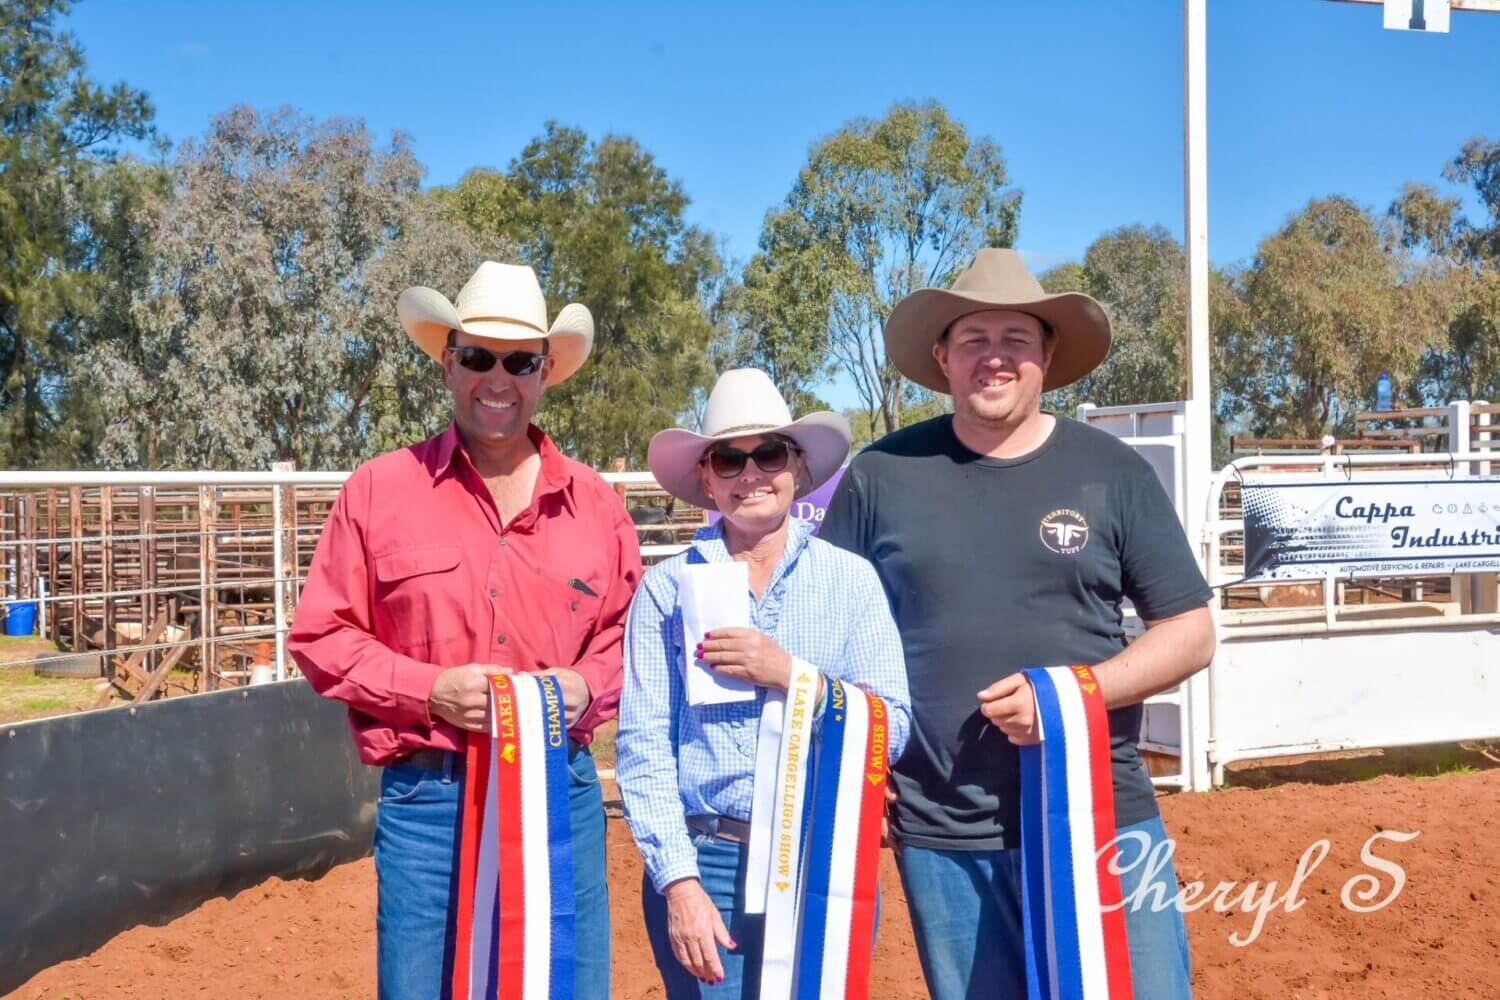 Sunday’s Winners were Dave Gleeson, Kelli-ann Naughton and Trevor Quarrel. Image Credit: Cheryl Squires via the Lake Cargelligo Rodeo and Gymkhana Facebook Page.